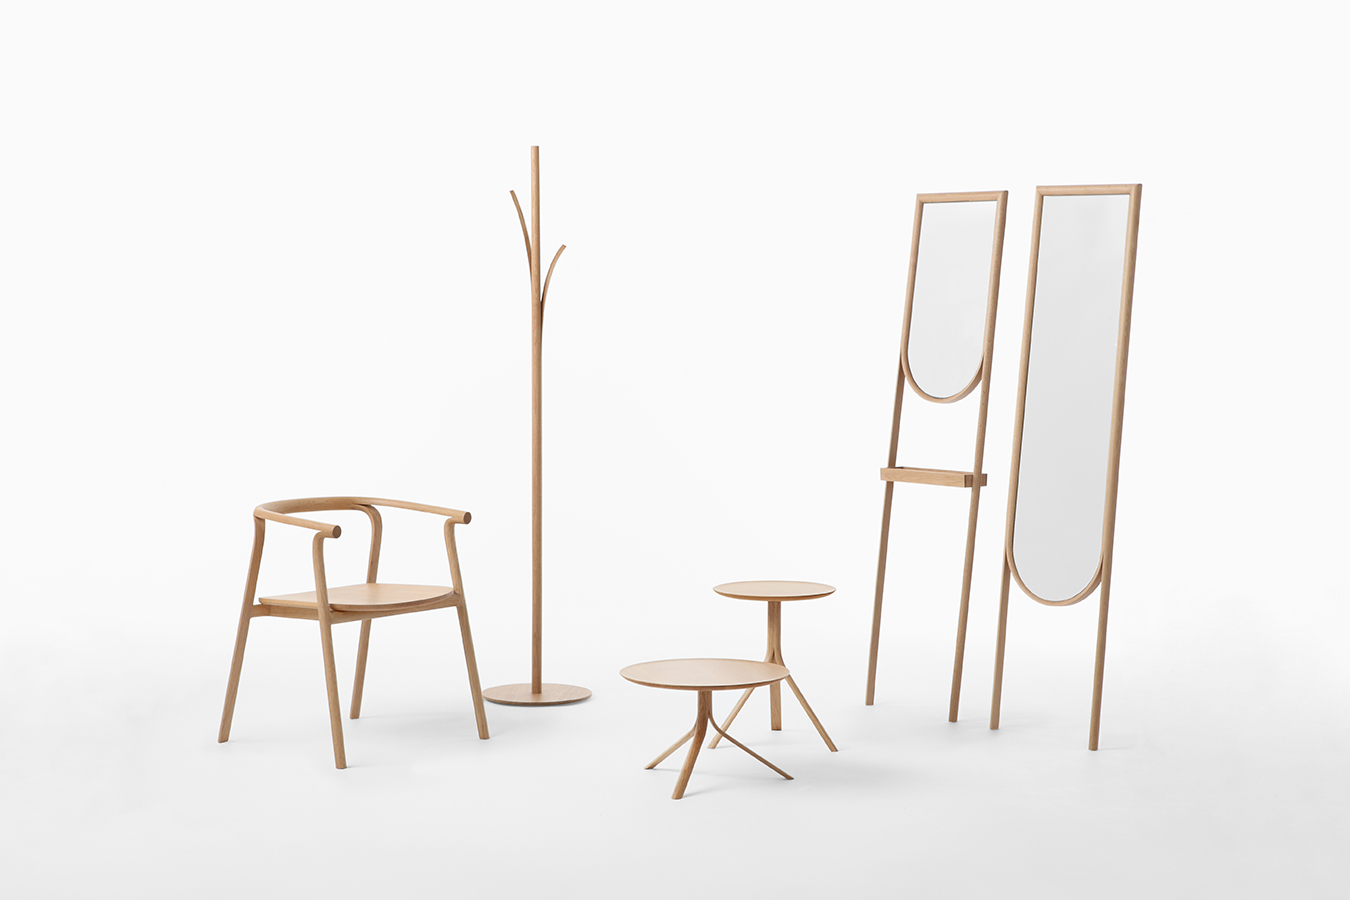 NUVO Daily Edit: Nendo Projects